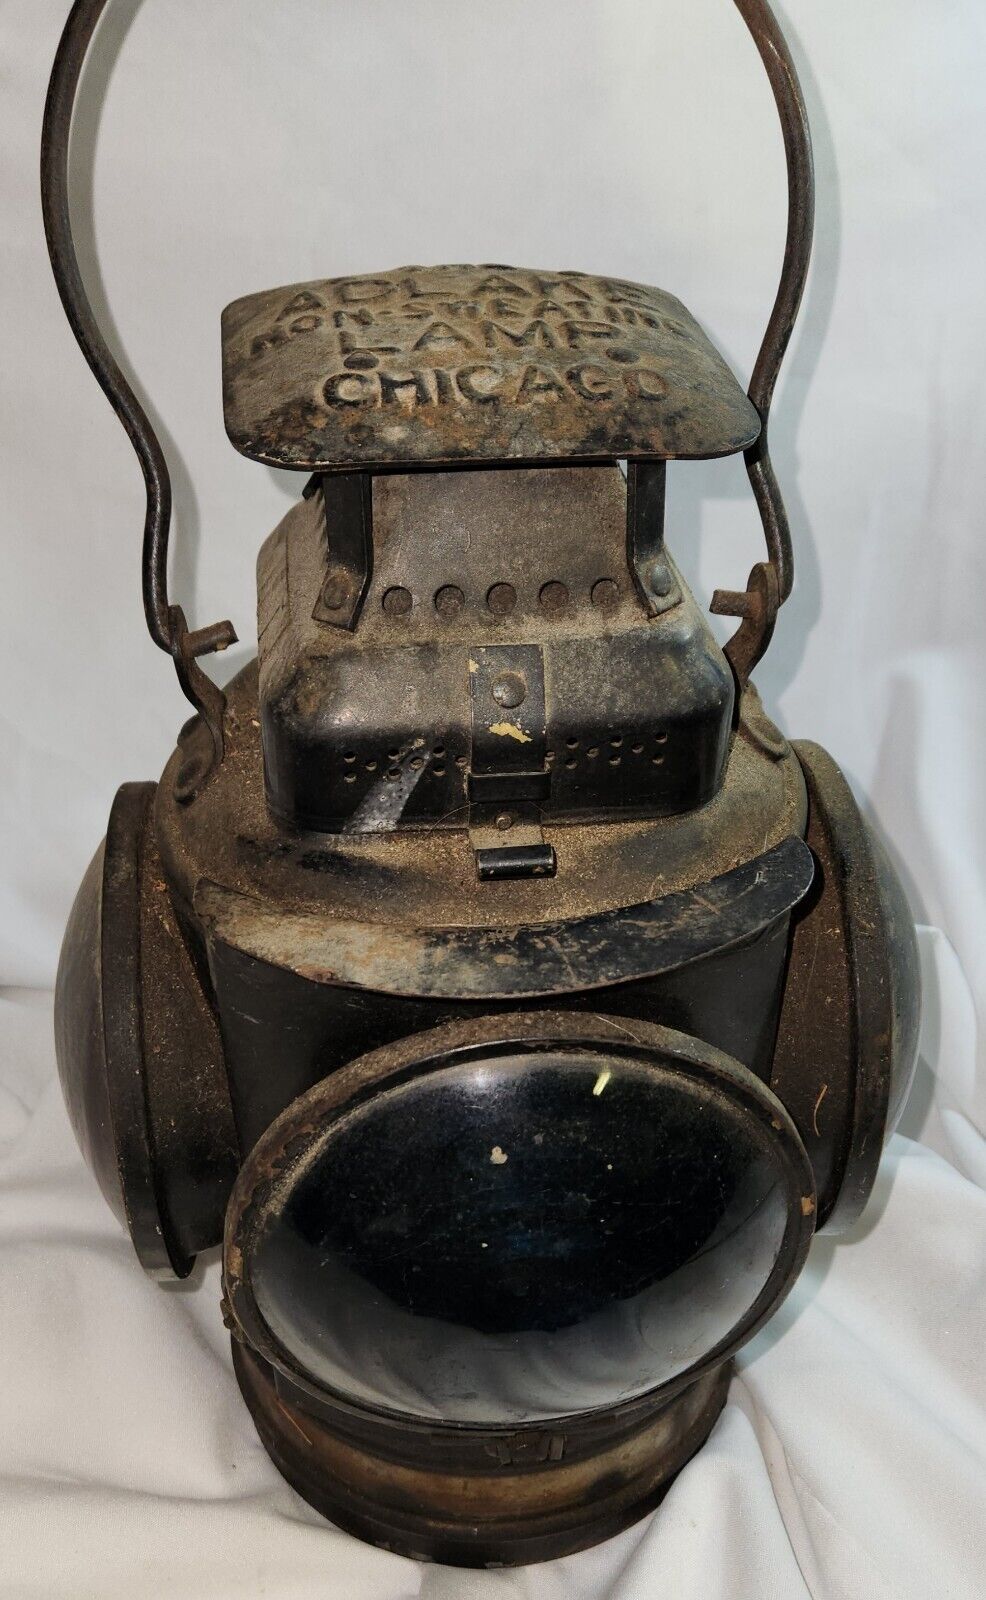 Vintage Chicago The Adlake Non-Sweating Lamp 4-Way Signal Railroad 